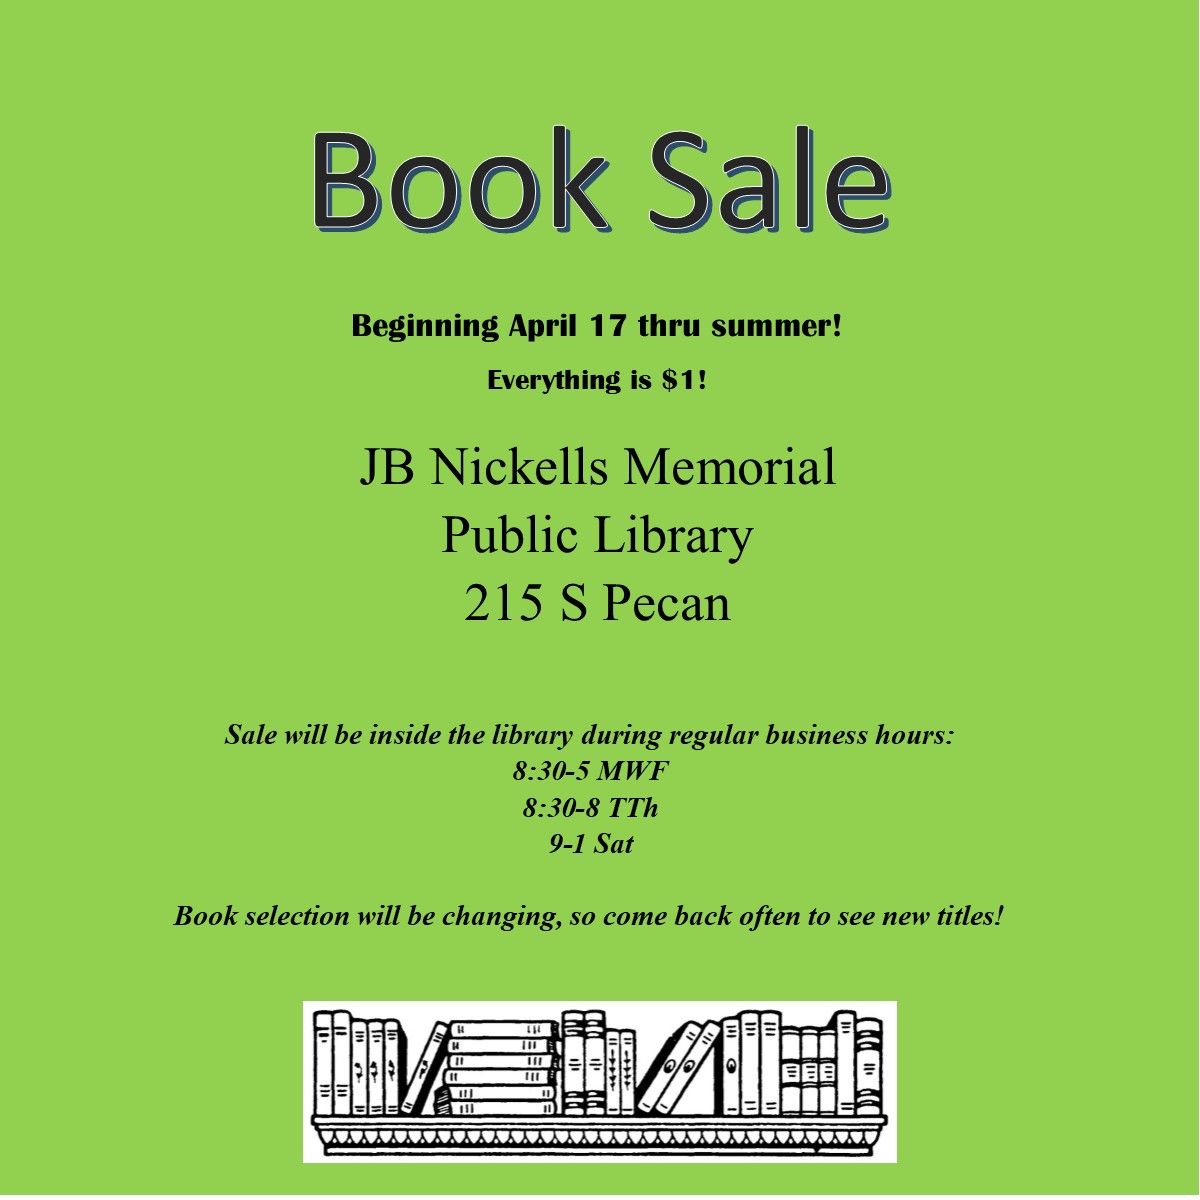 The Book Sale has officially begun! Everything is $1! Drop by at your convenience during business hours to check out the sale tables. 
We have lots more & will be adding new titles throughout the summer. #bigbooksale #booksforeveryone #cheapbooks #lulingtexas #lulingpubliclibrary